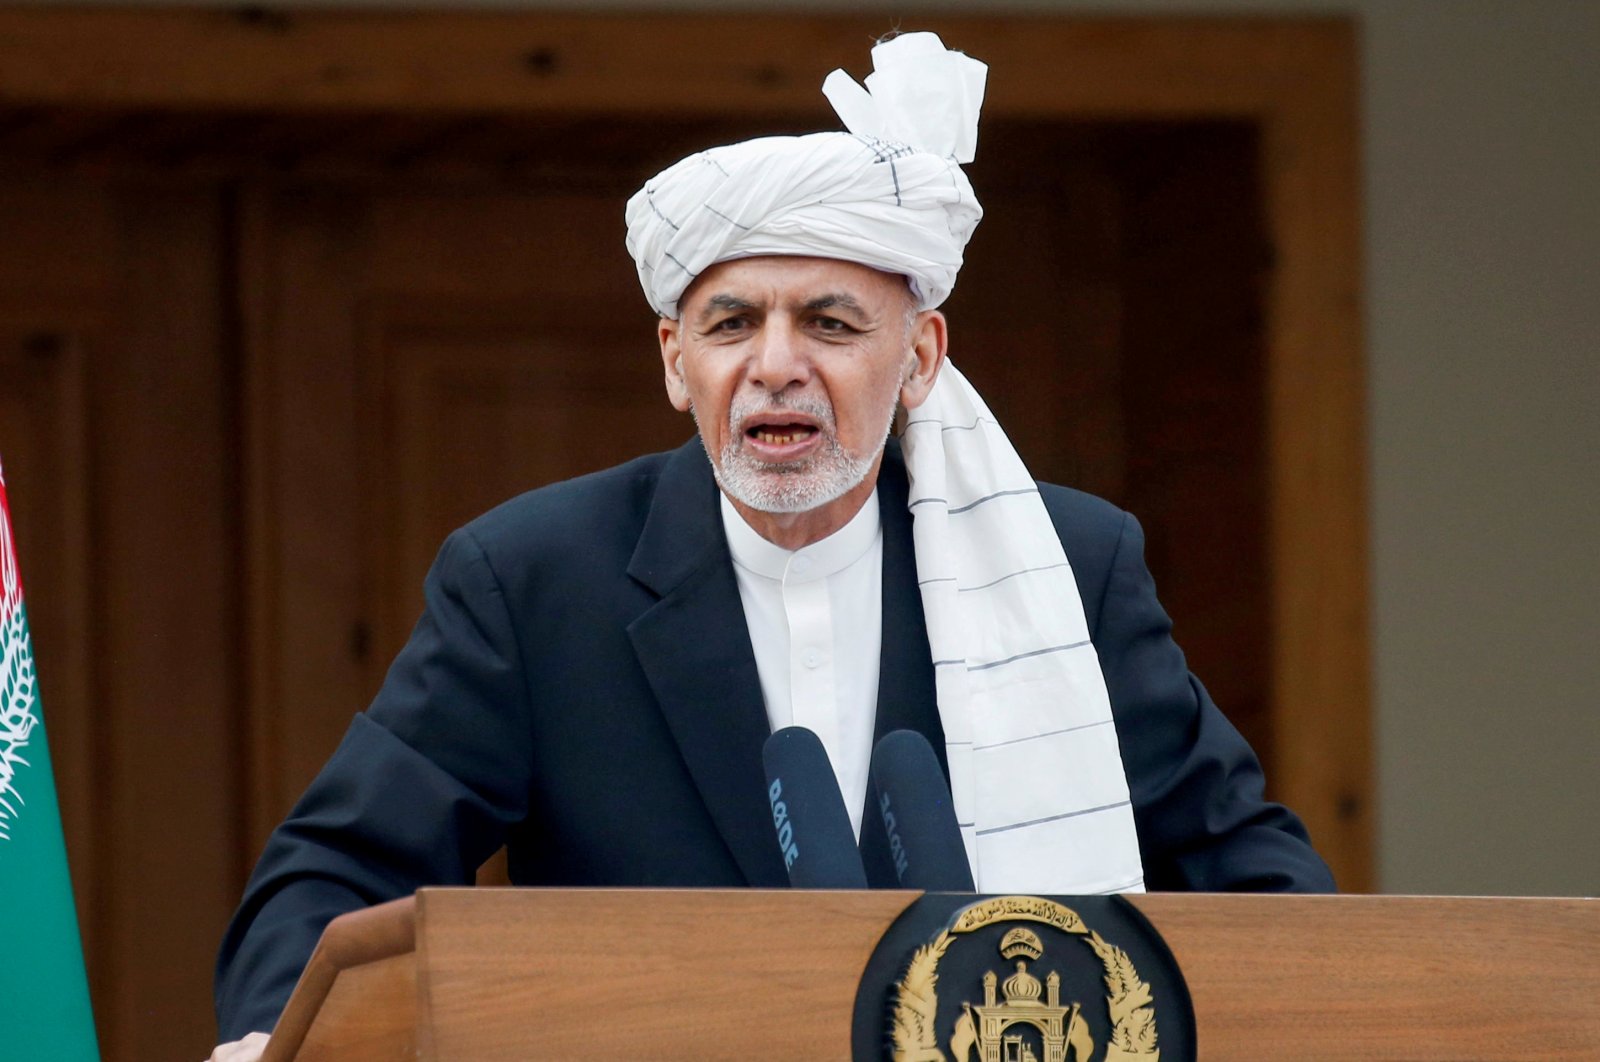 Afghanistan's President Ashraf Ghani speaks during his inauguration as president, in Kabul, Afghanistan, March 9, 2020. (Reuters Photo)